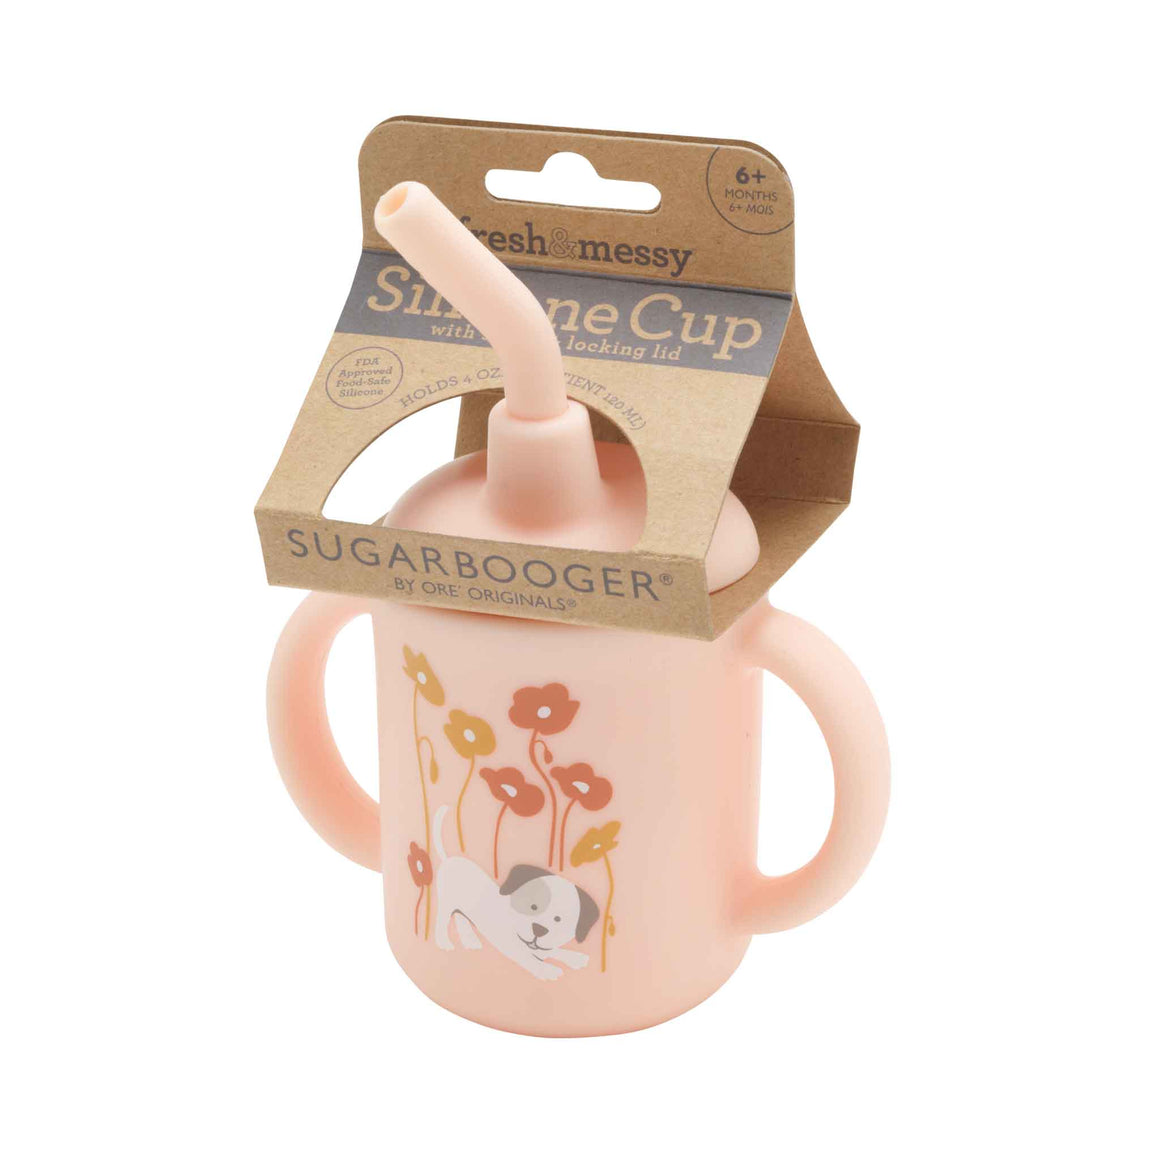 Puppies & Poppies - Fresh & Messy Sippy Cup